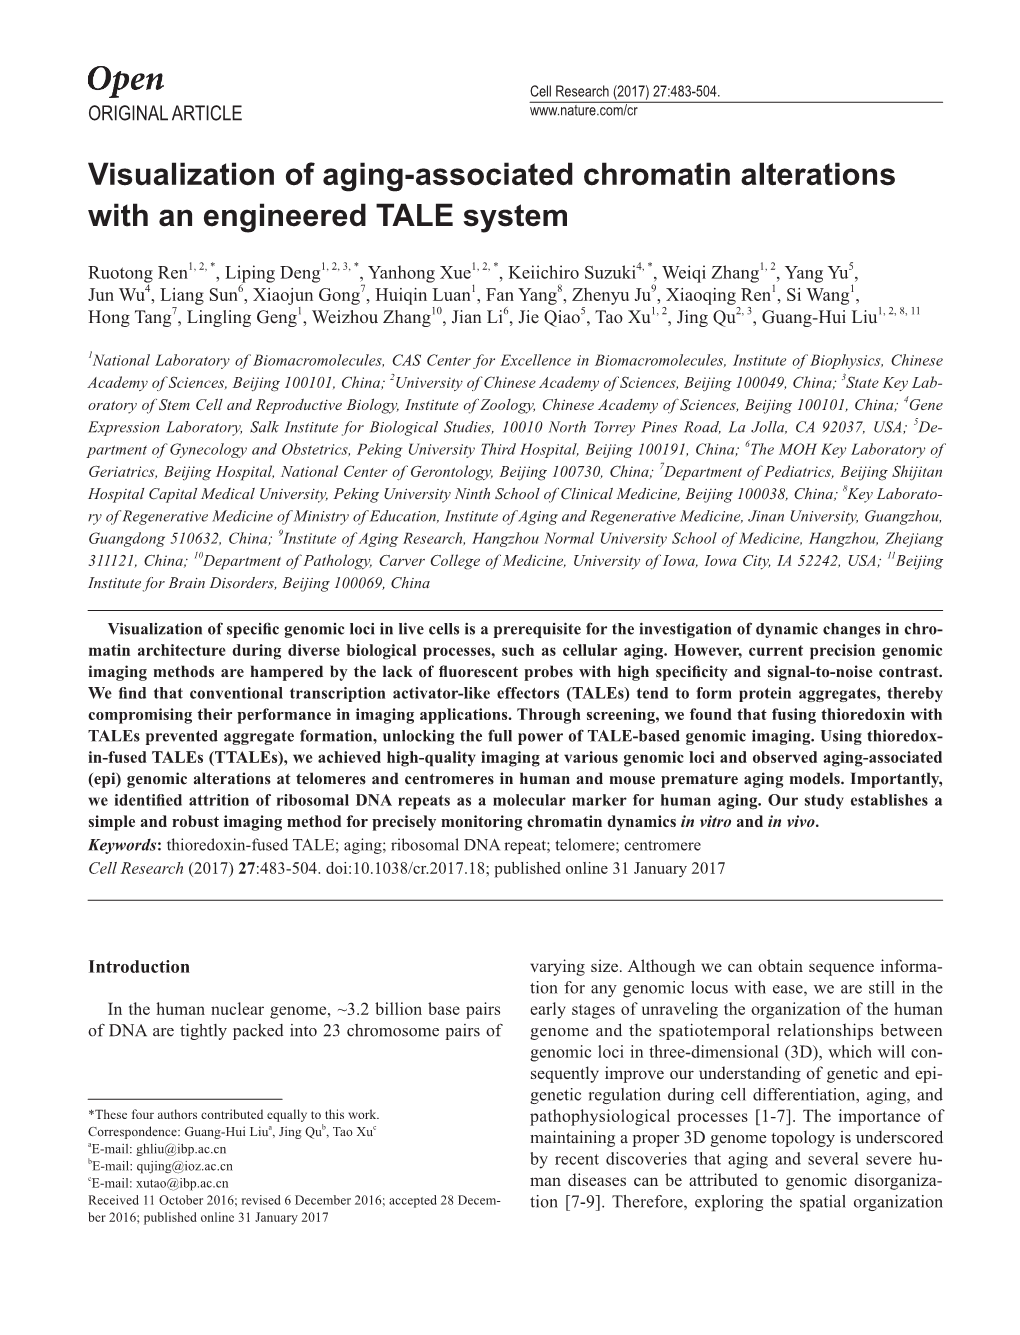 Visualization of Aging-Associated Chromatin Alterations with an Engineered TALE System